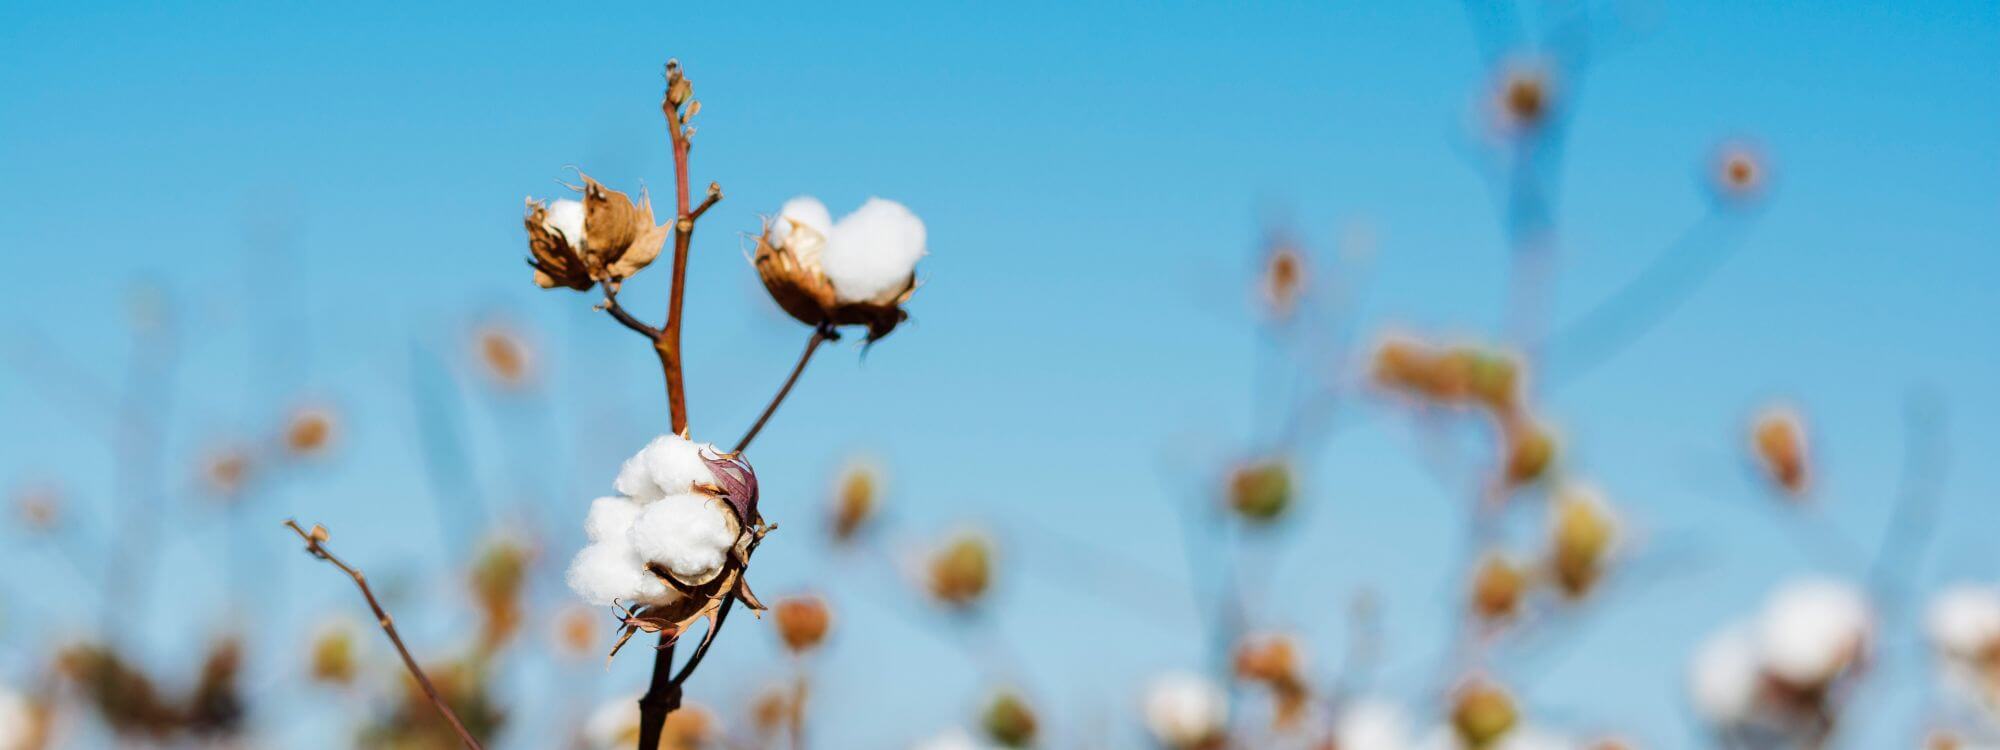 organic cotton puffs growing in a cotton field